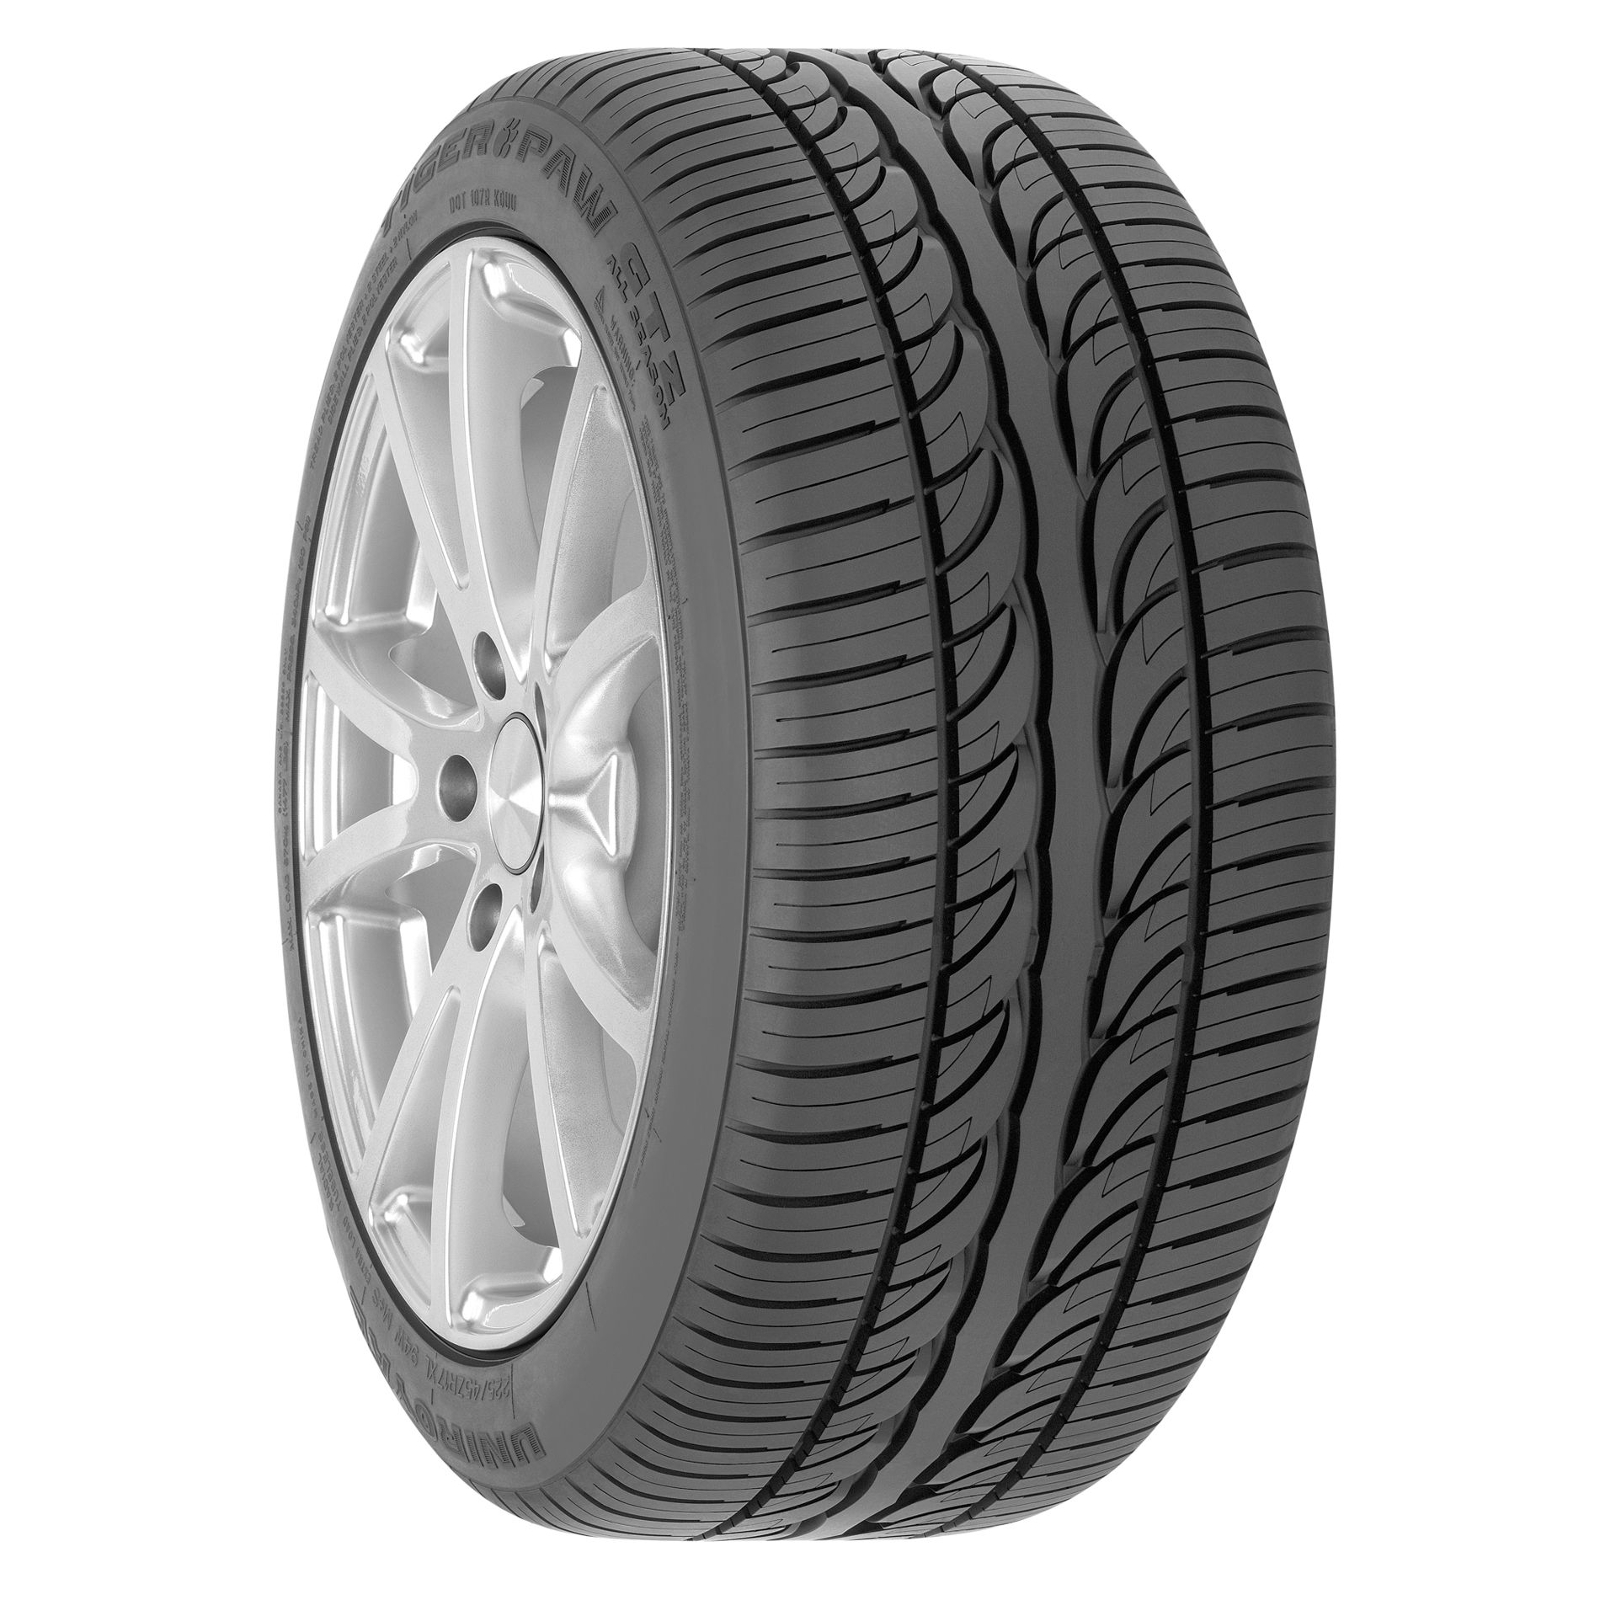 uniroyal-tiger-paw-touring-215-65r16-98t-bw-all-season-tire-shop-your